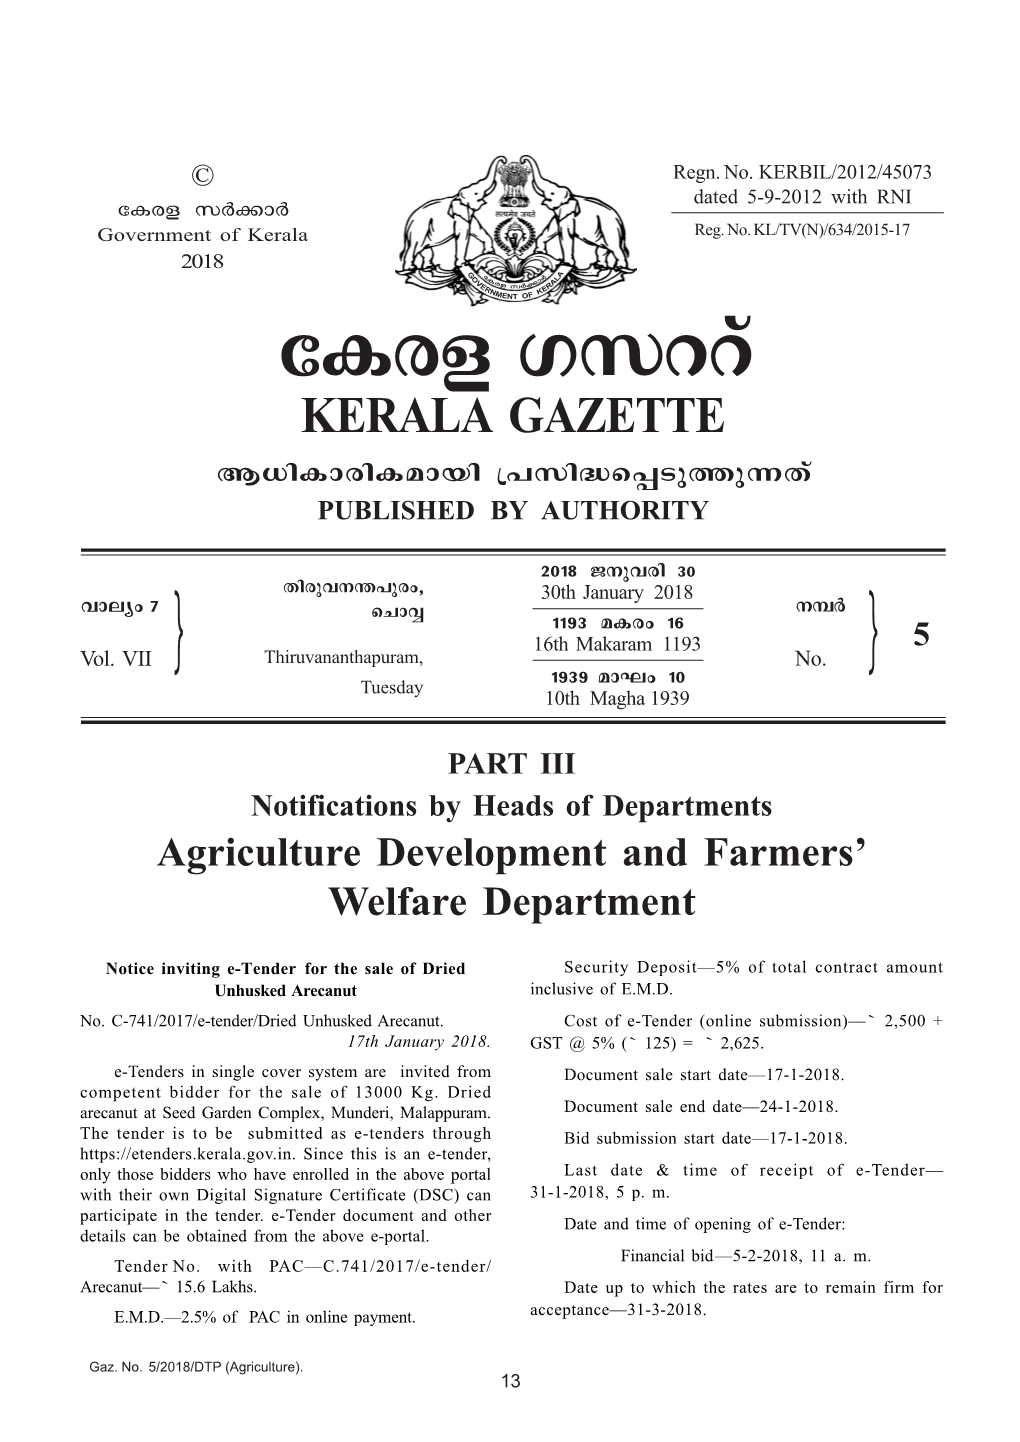 Agriculture Development and Farmers’ Welfare Department